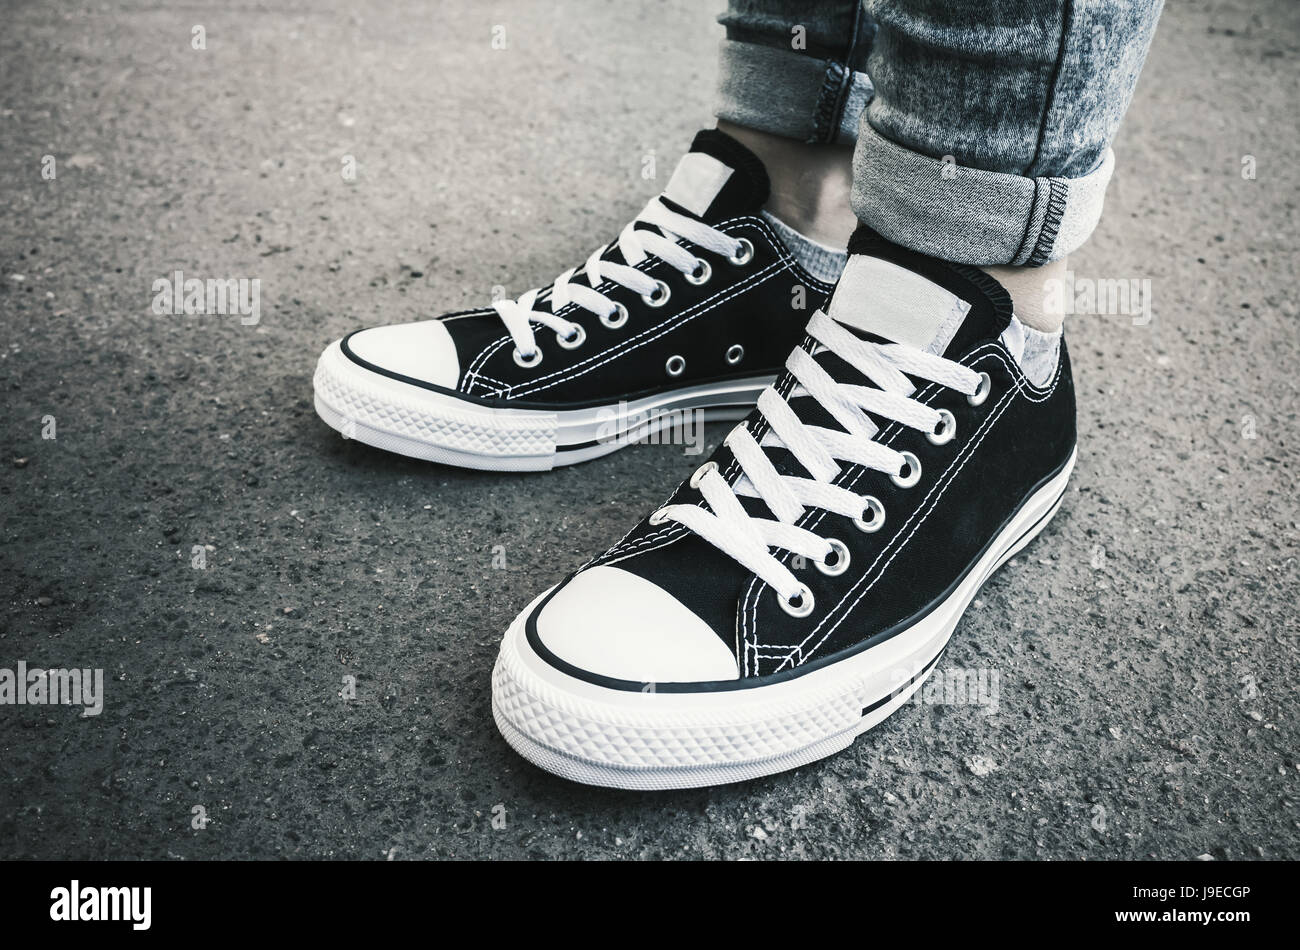 Black and white new sneakers, teenager feet stand on dirty urban pavement.  Closeup photo with selective focus and vintage tonal correction filter  Stock Photo - Alamy